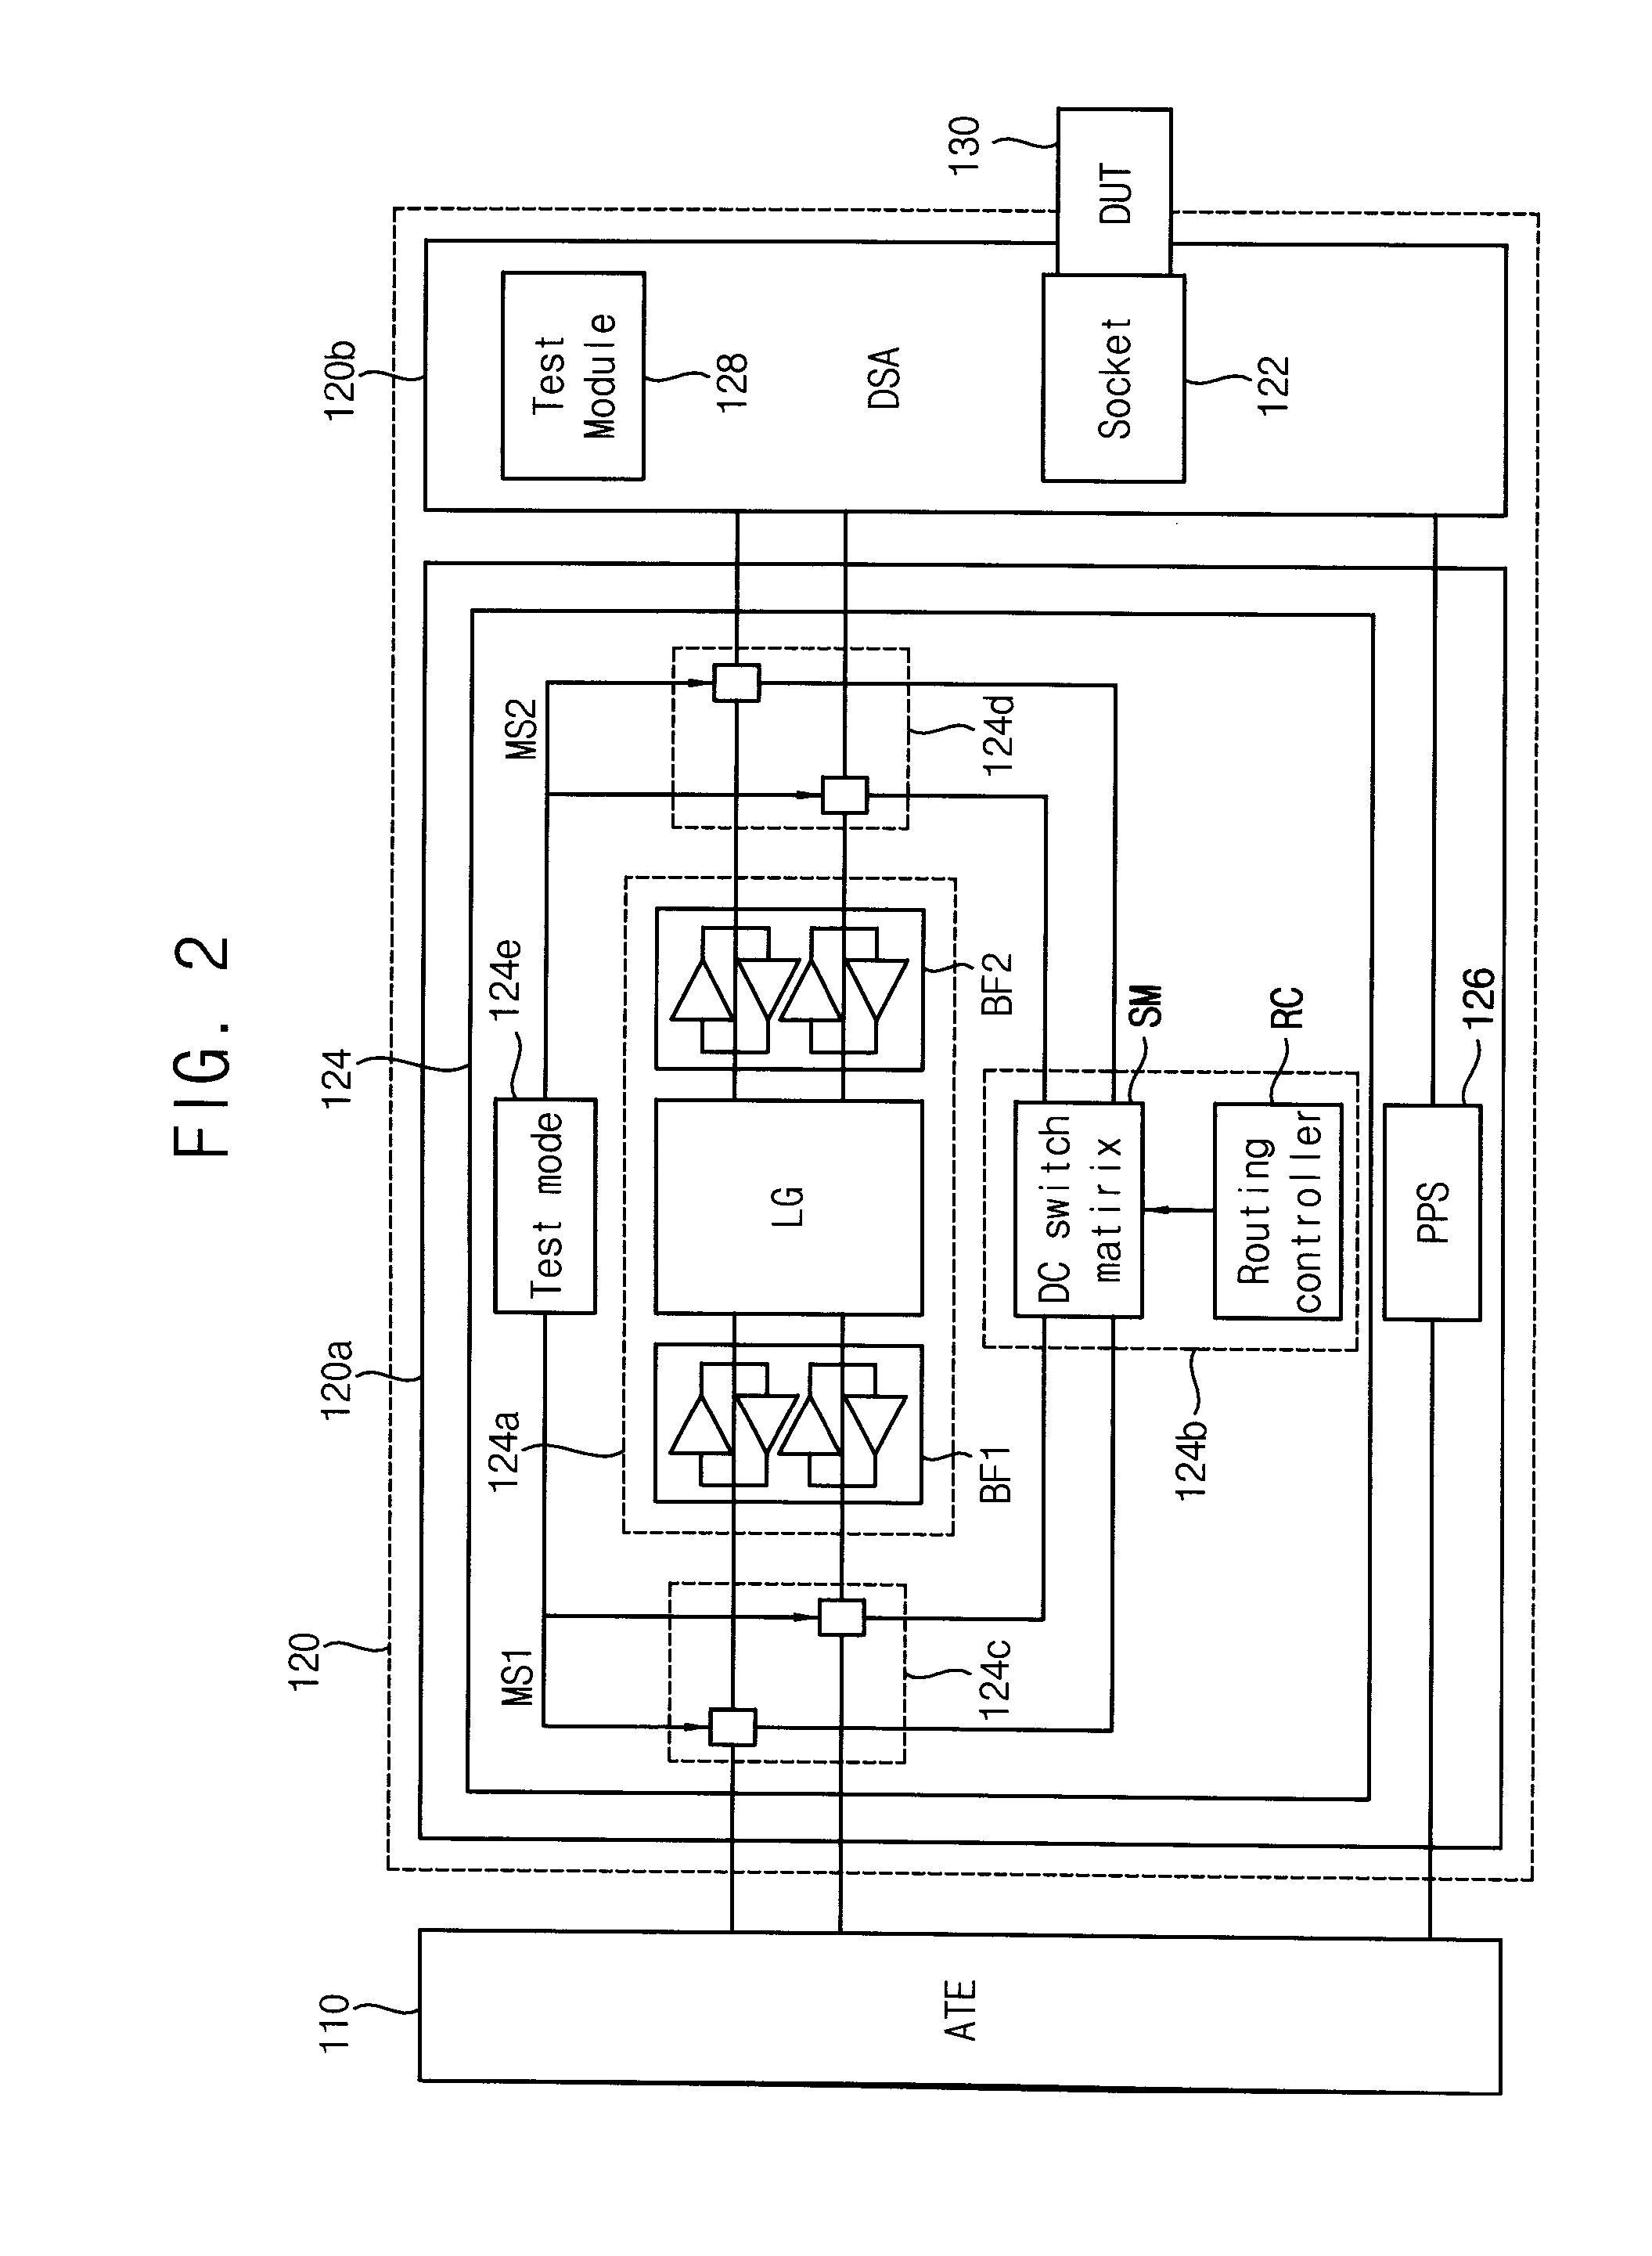 Semiconductor device on device interface board and test system using the same